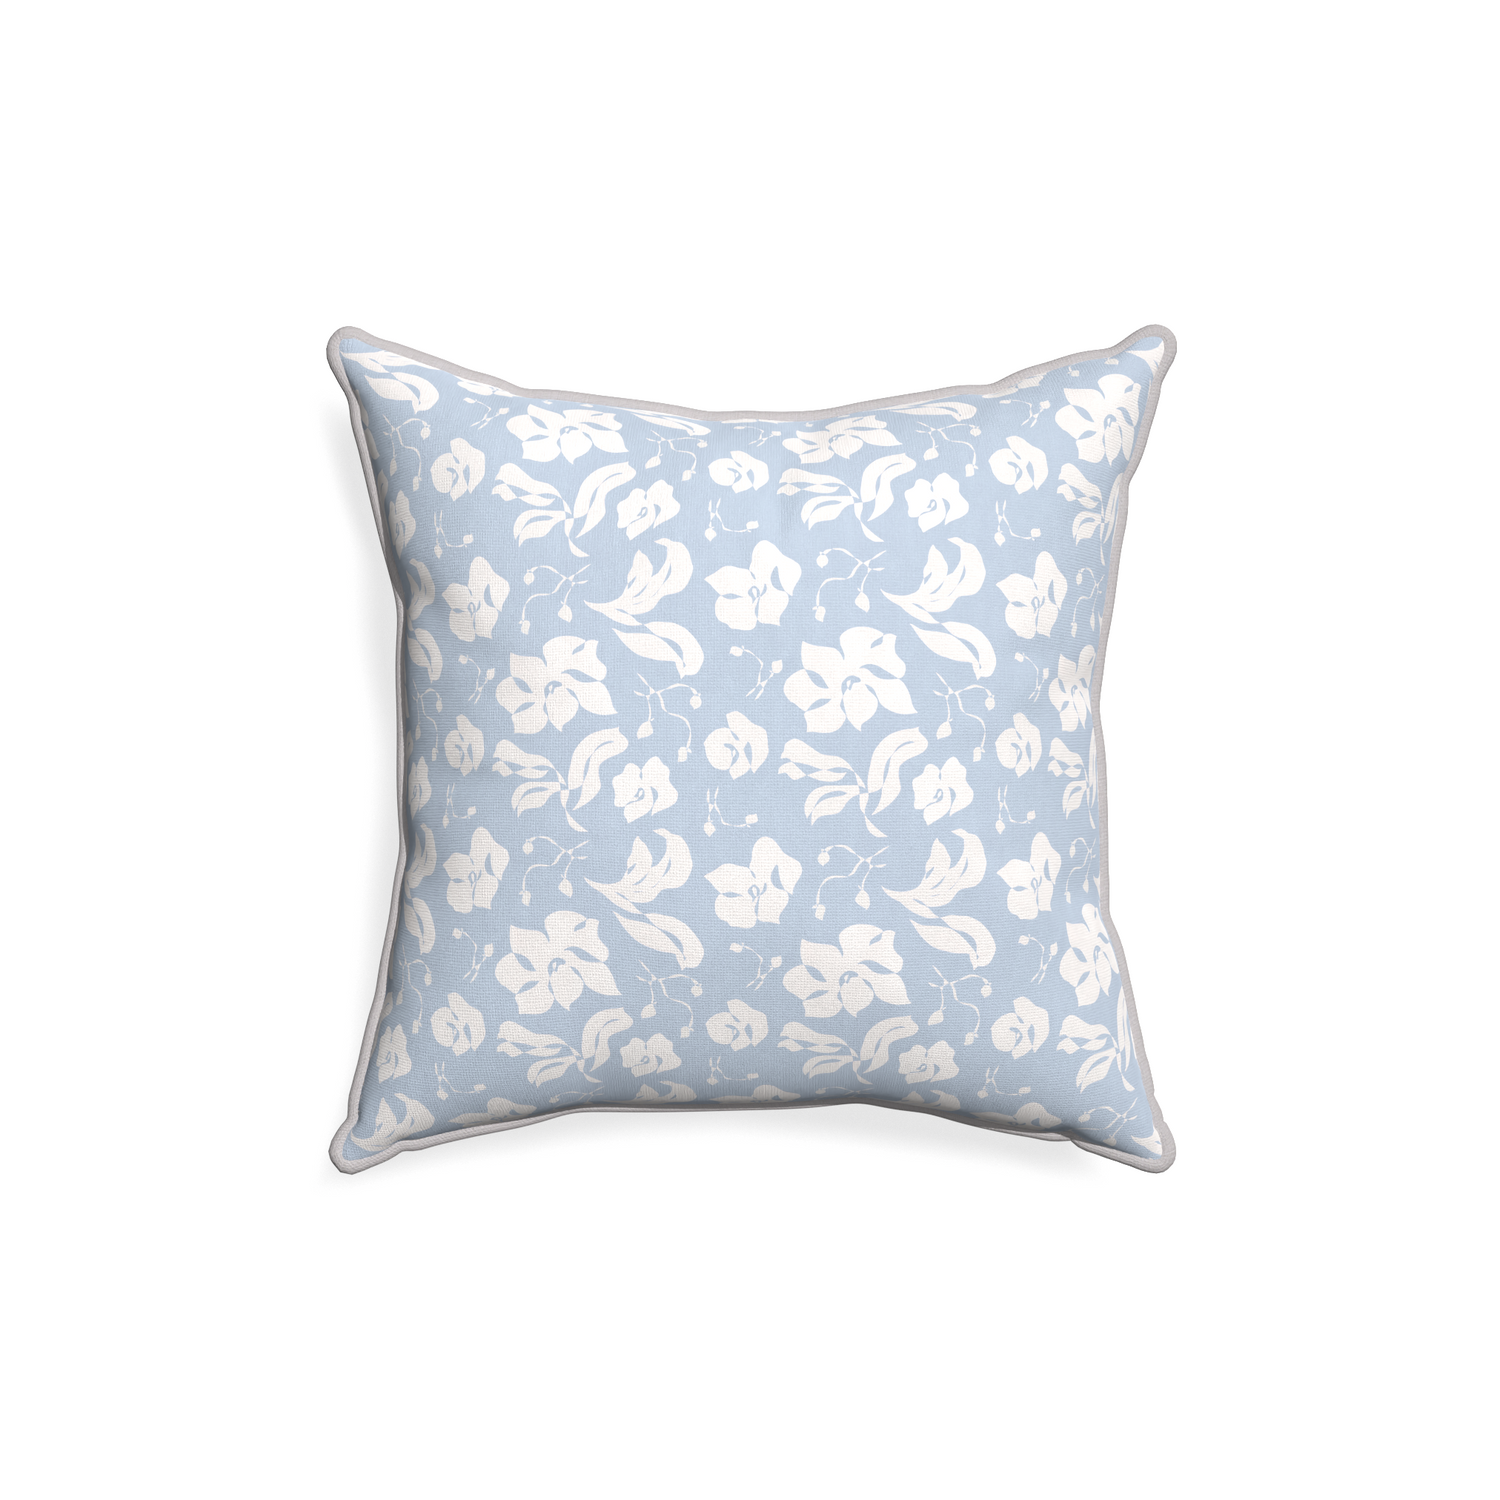 18-square georgia custom cornflower blue floralpillow with pebble piping on white background